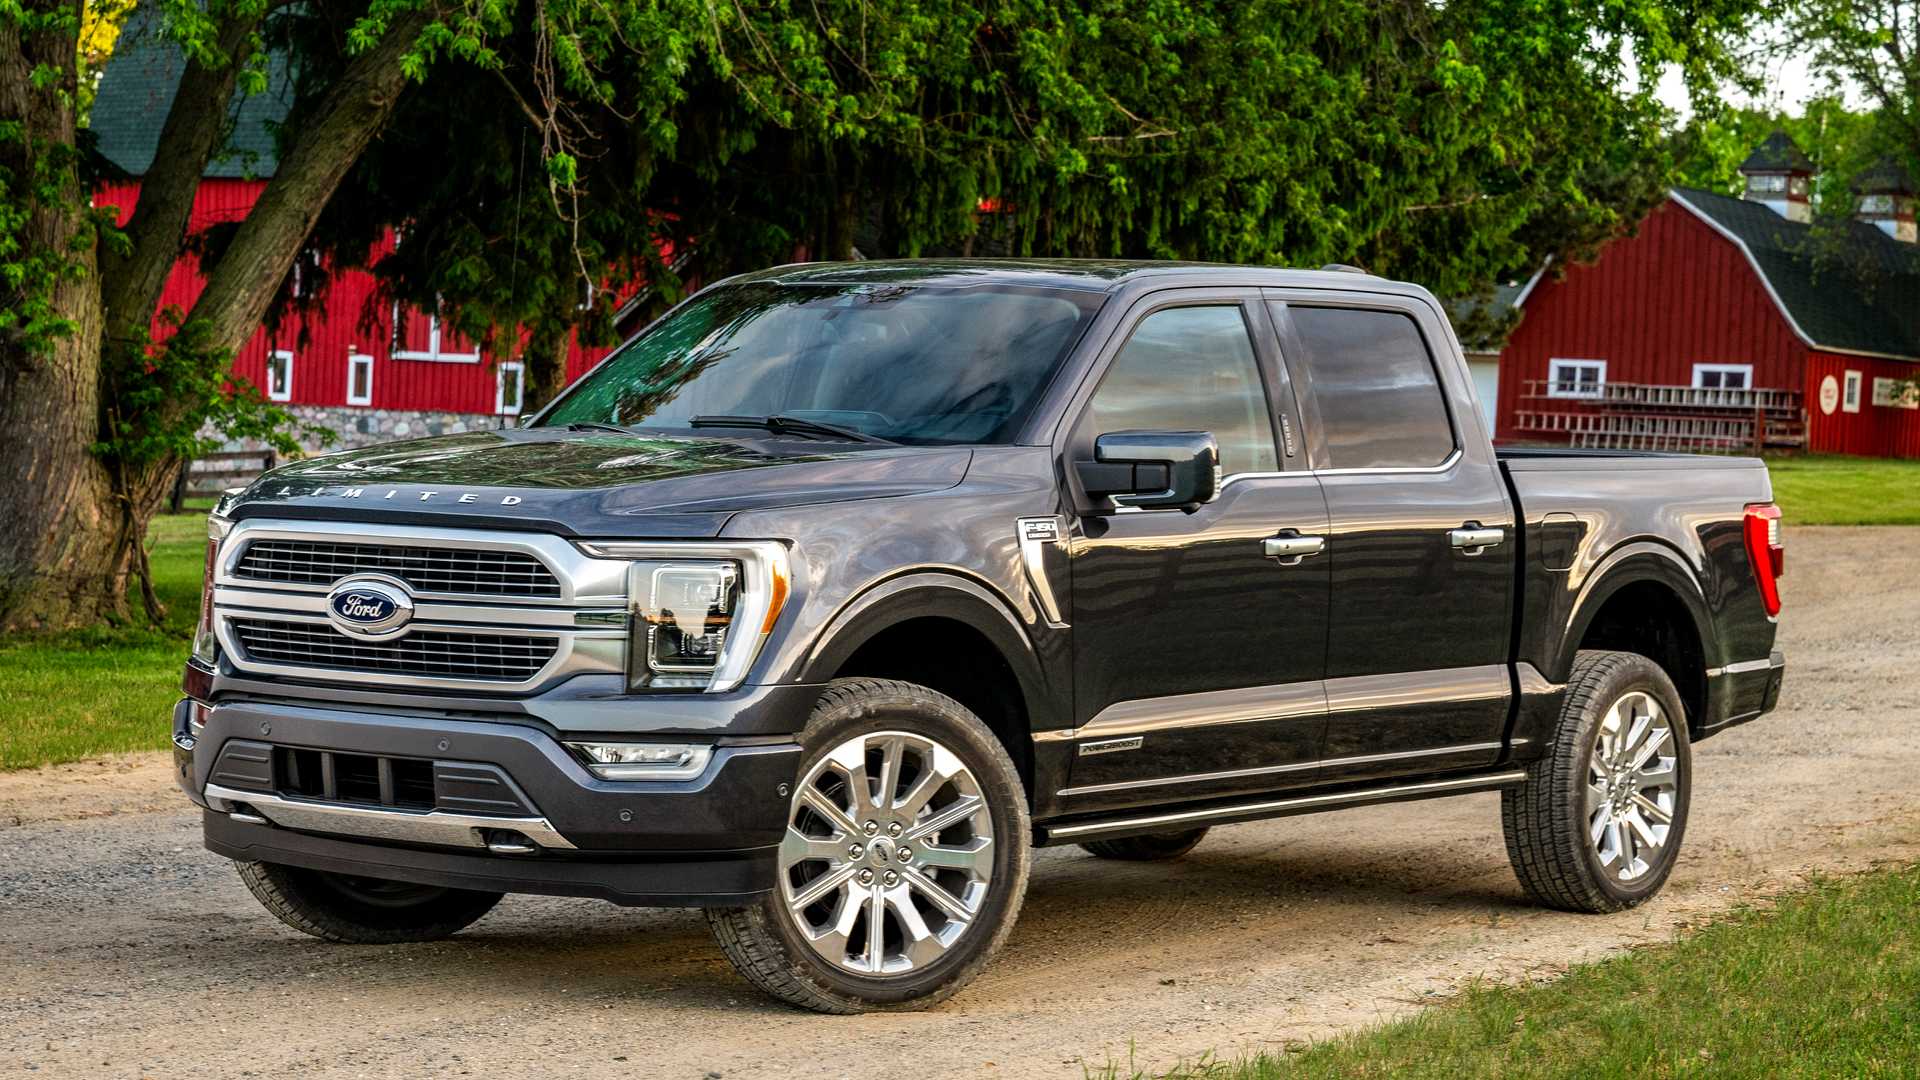 Why The Ford F-150 Is The Best Selling Vehicle In The US